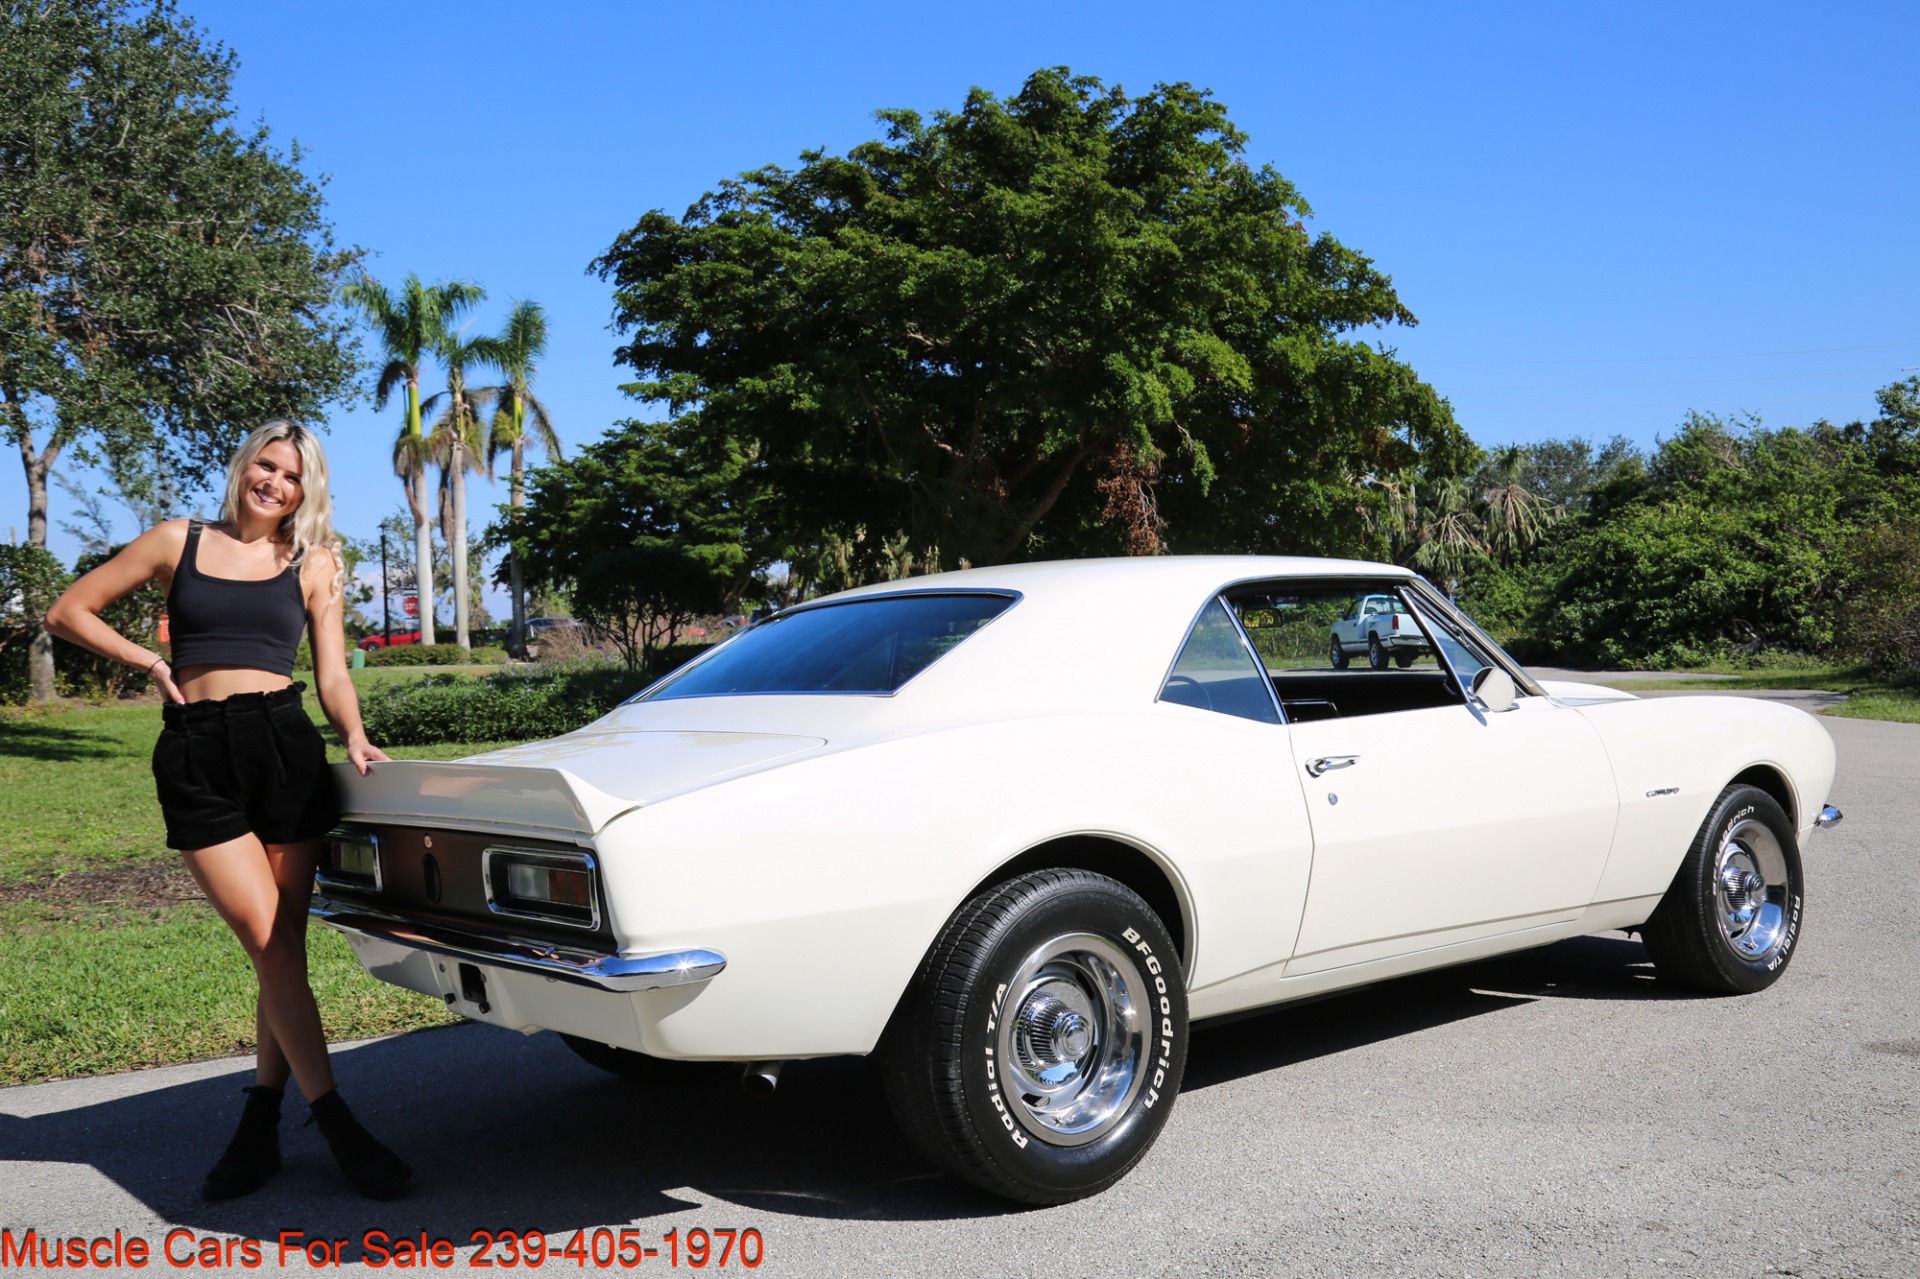 Used 1967 Chevrolet Camaro V8 Manual 12 bolt Rear for sale Sold at Muscle Cars for Sale Inc. in Fort Myers FL 33912 8